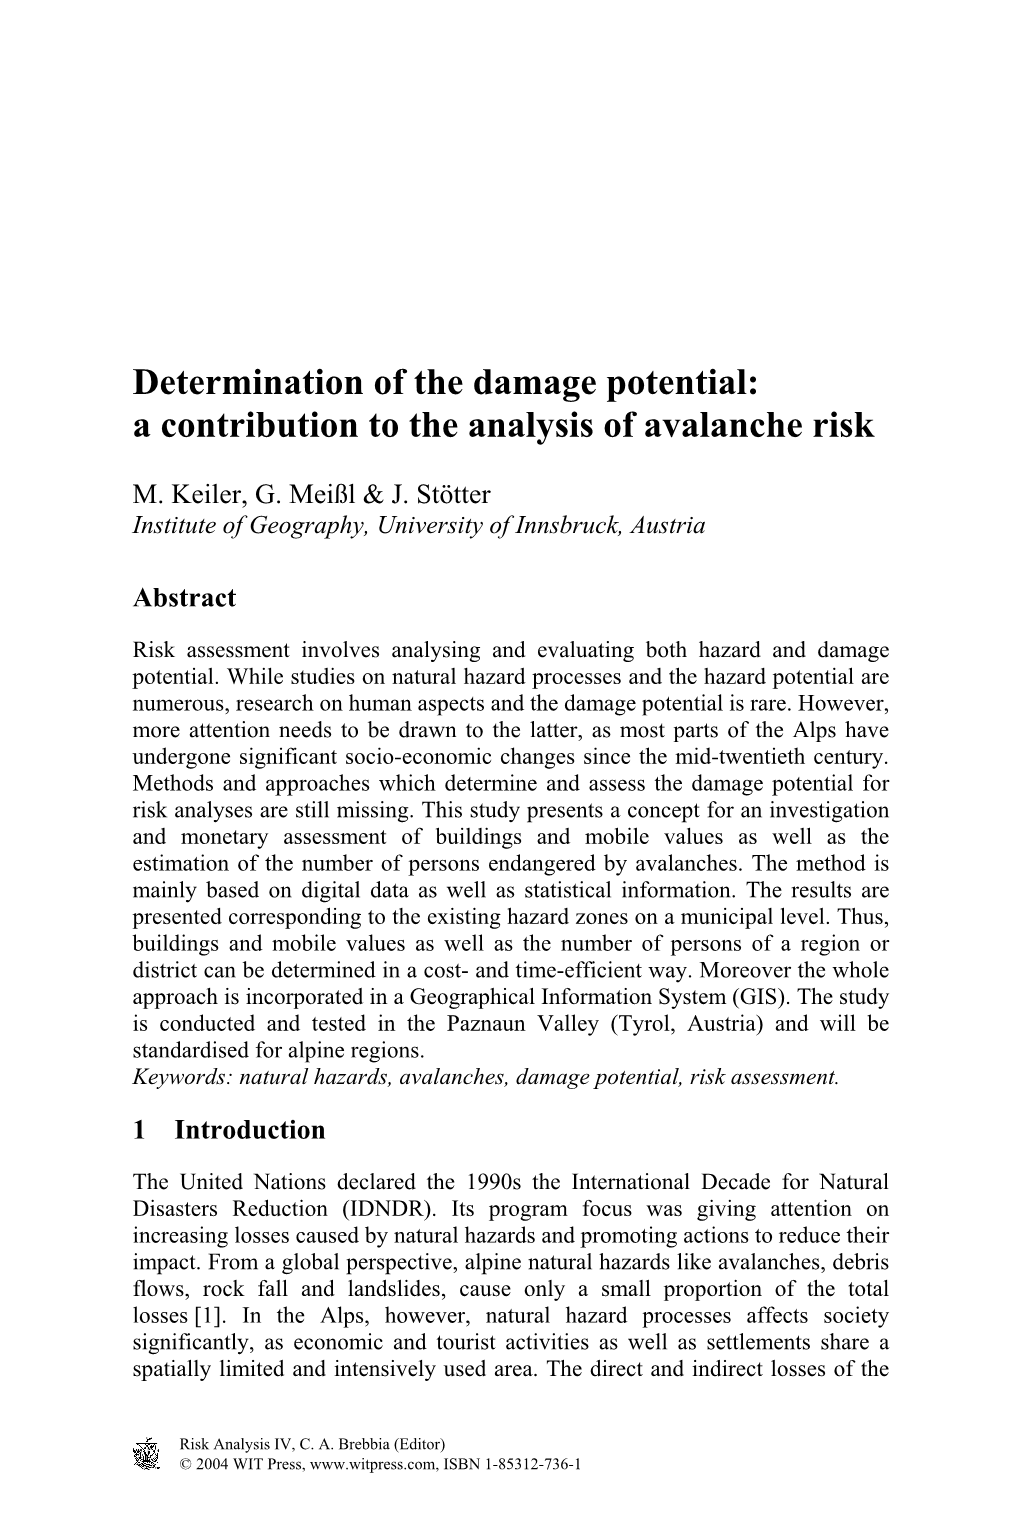 Determination of the Damage Potential: a Contribution to the Analysis of Avalanche Risk